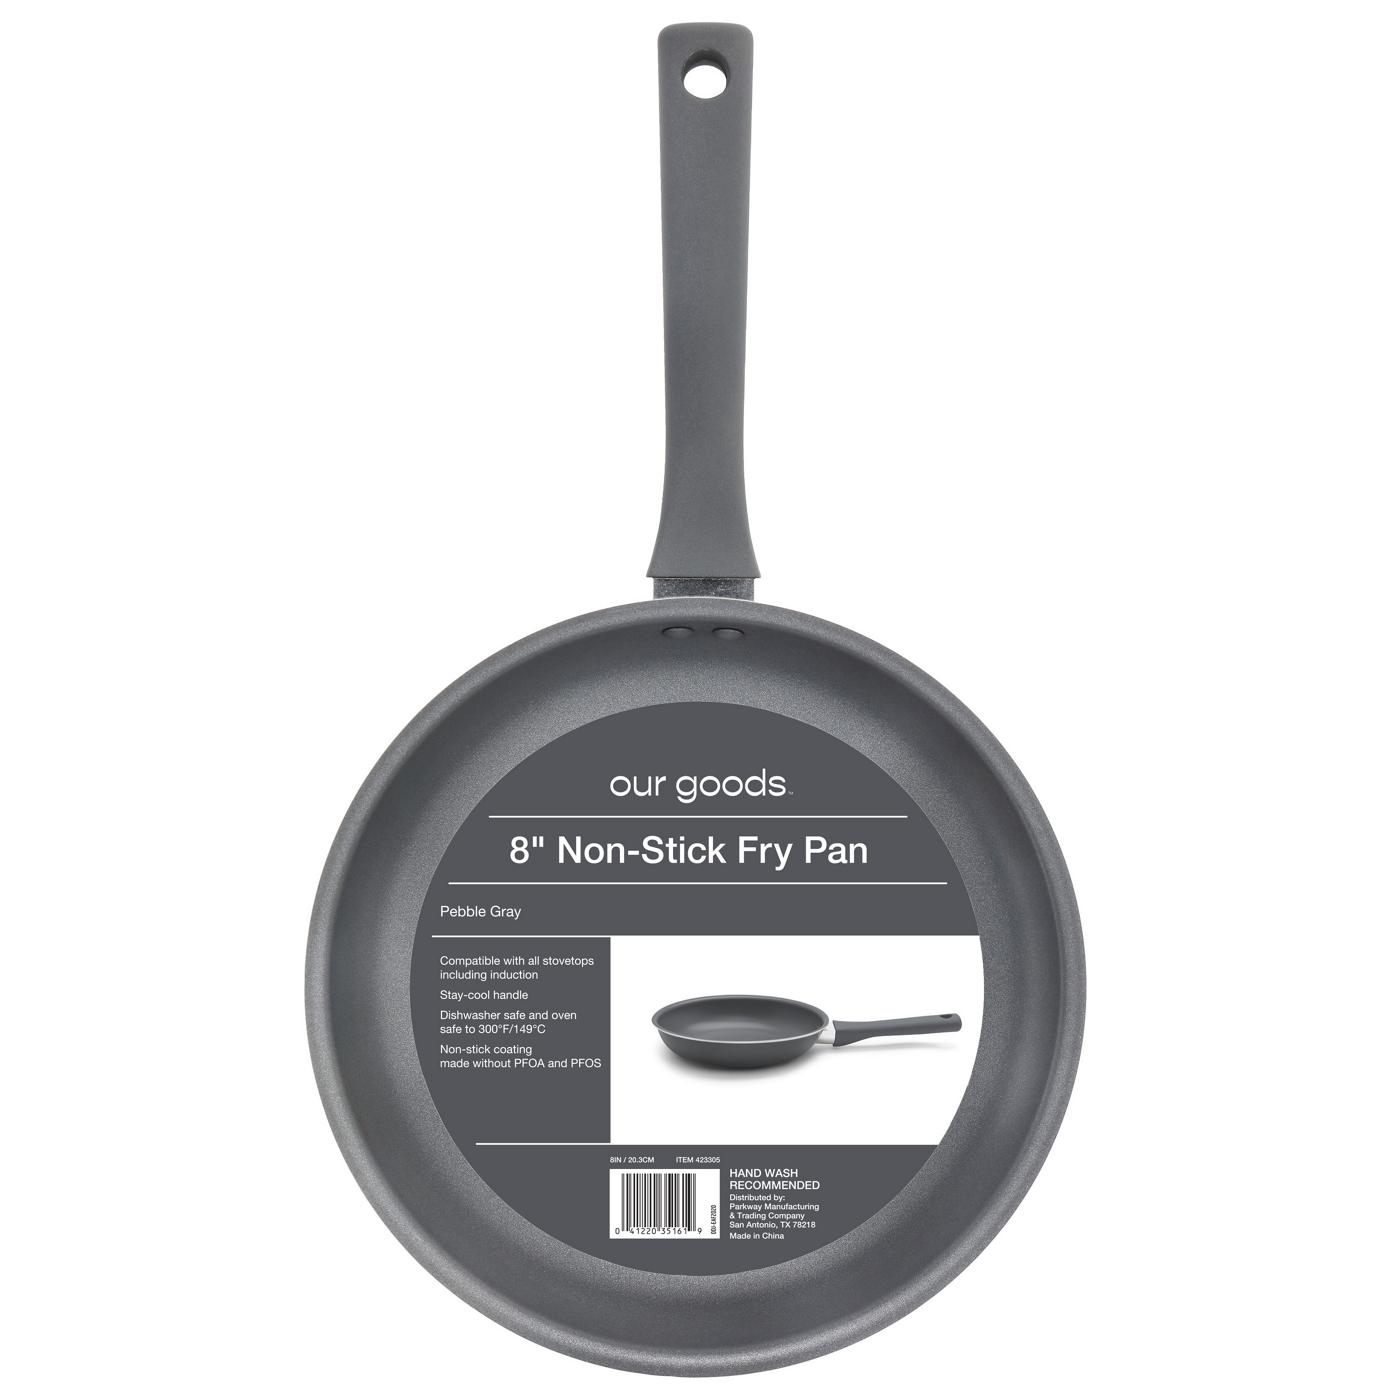 our goods Non-Stick Fry Pan - Pebble Gray; image 2 of 2